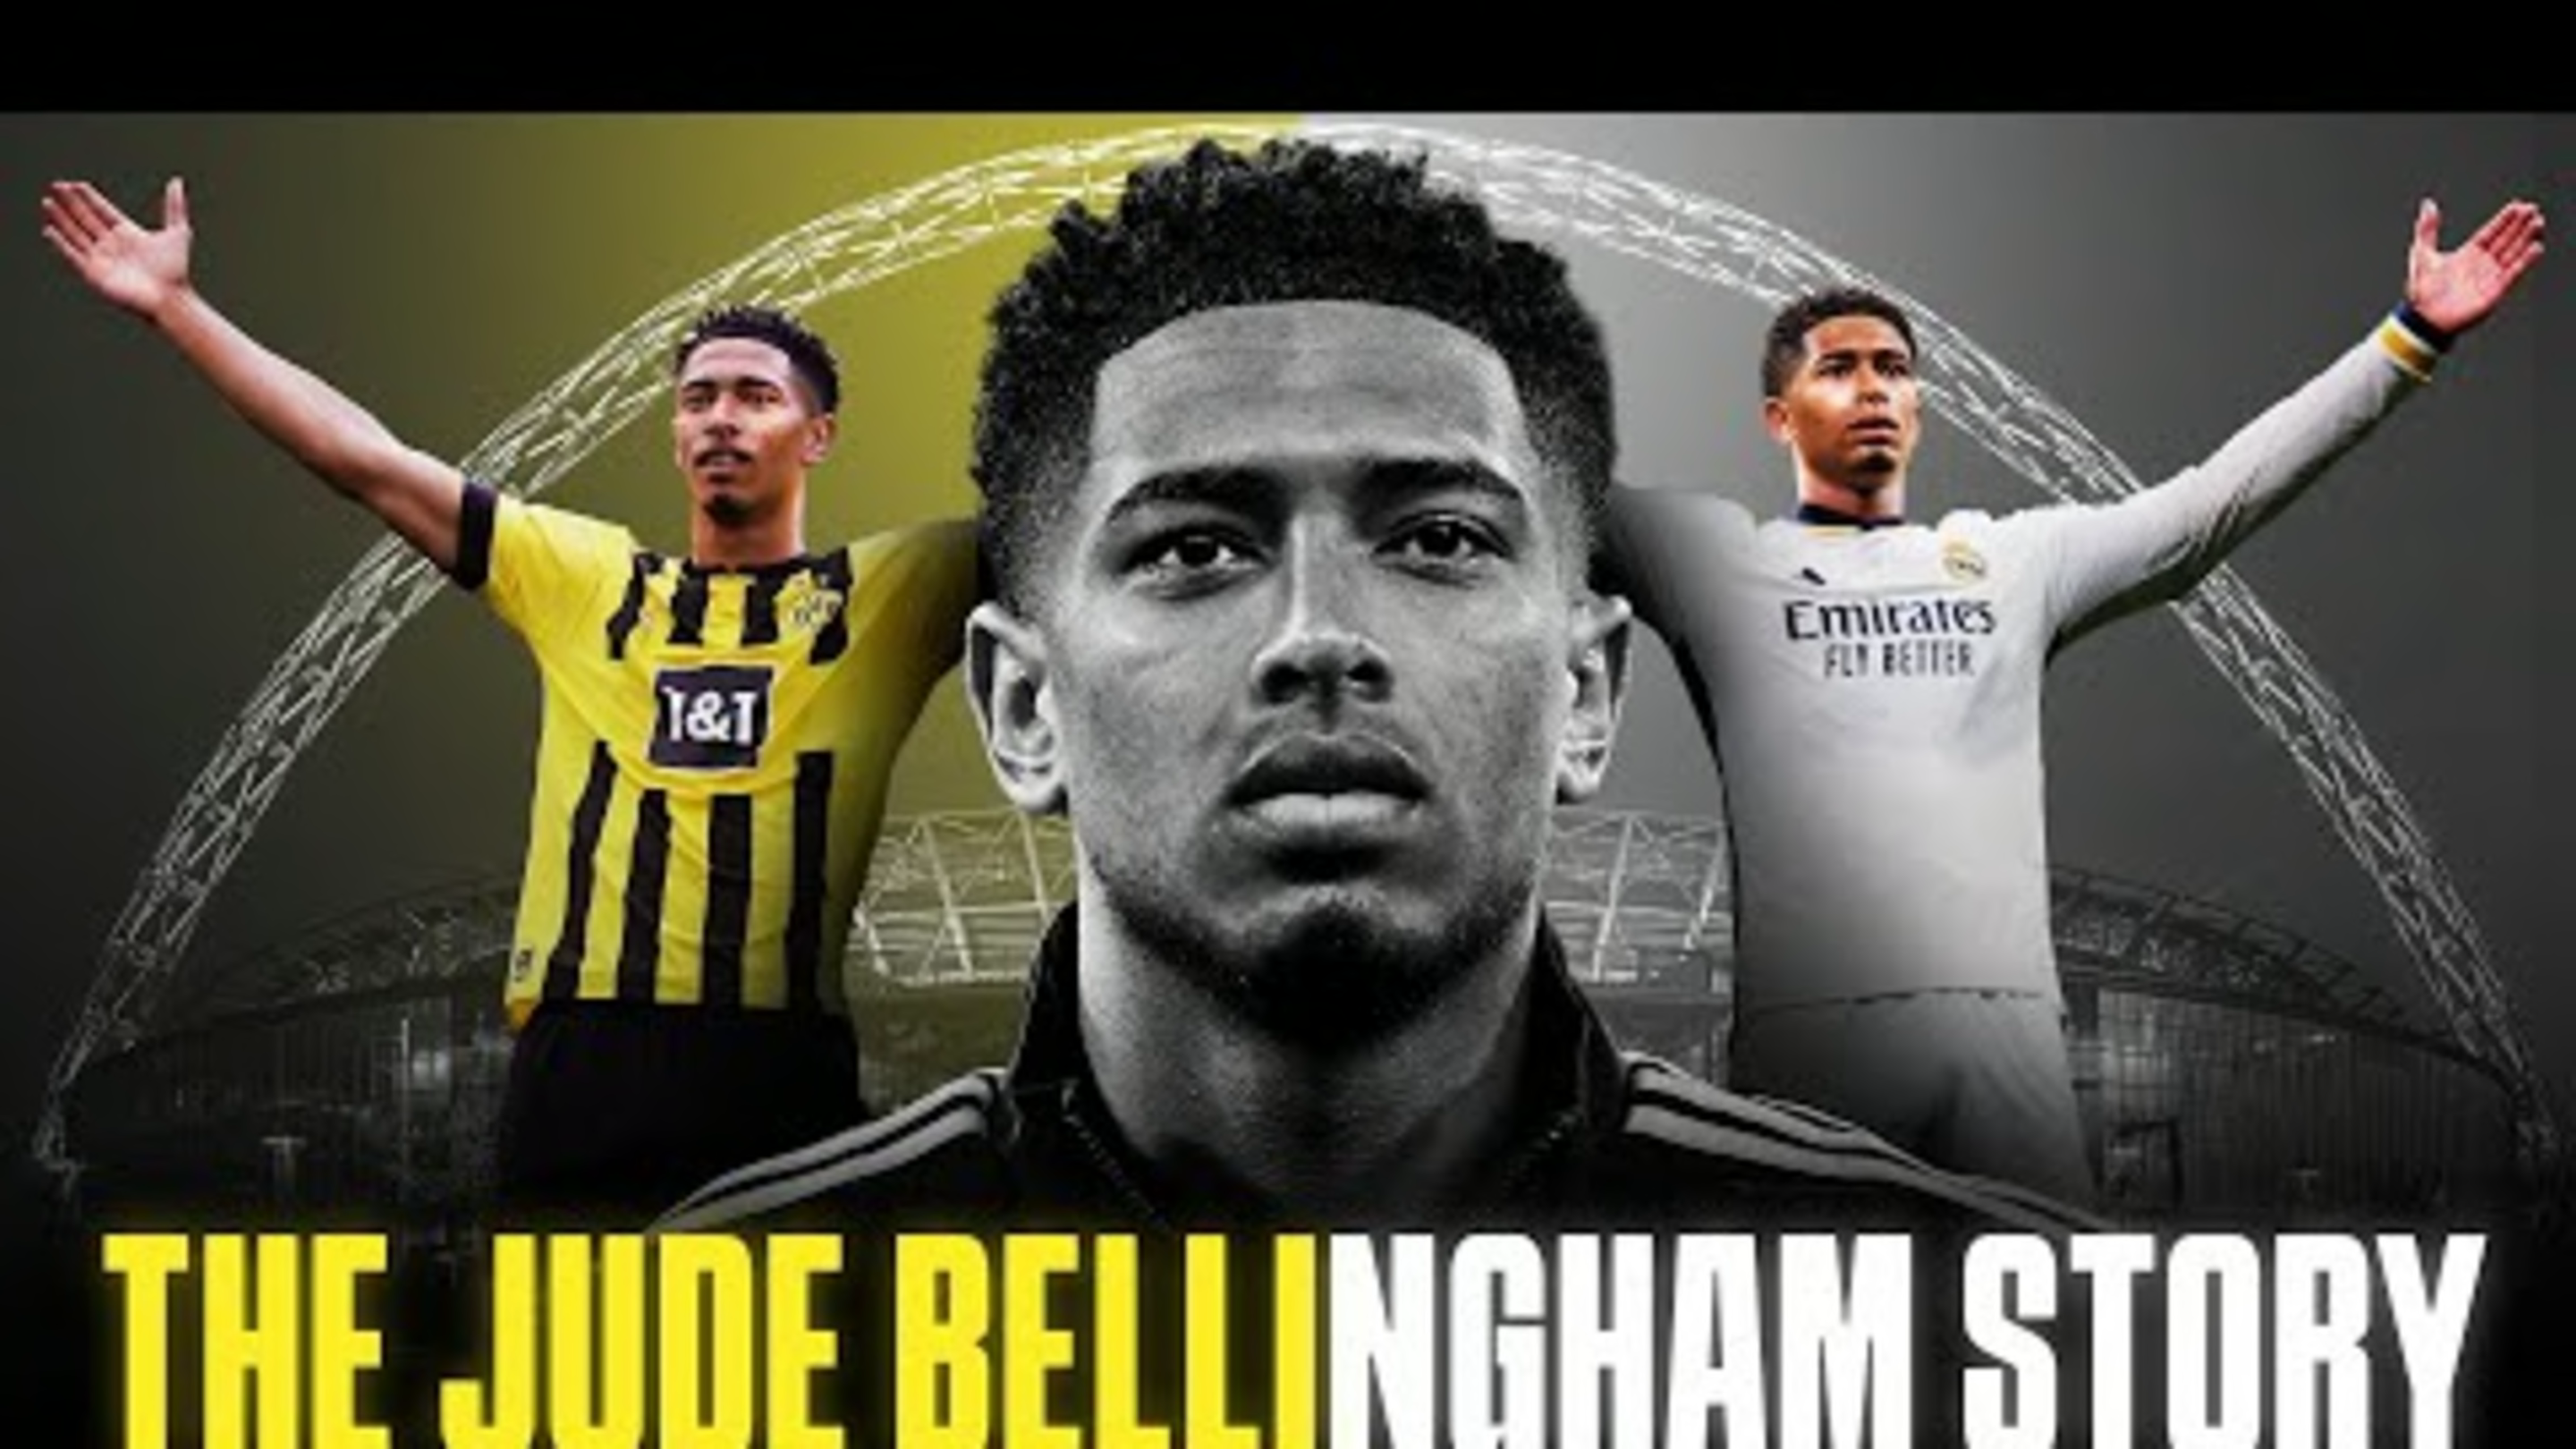 Jude Bellingham - From Birmingham City to the UEFA Champions League final